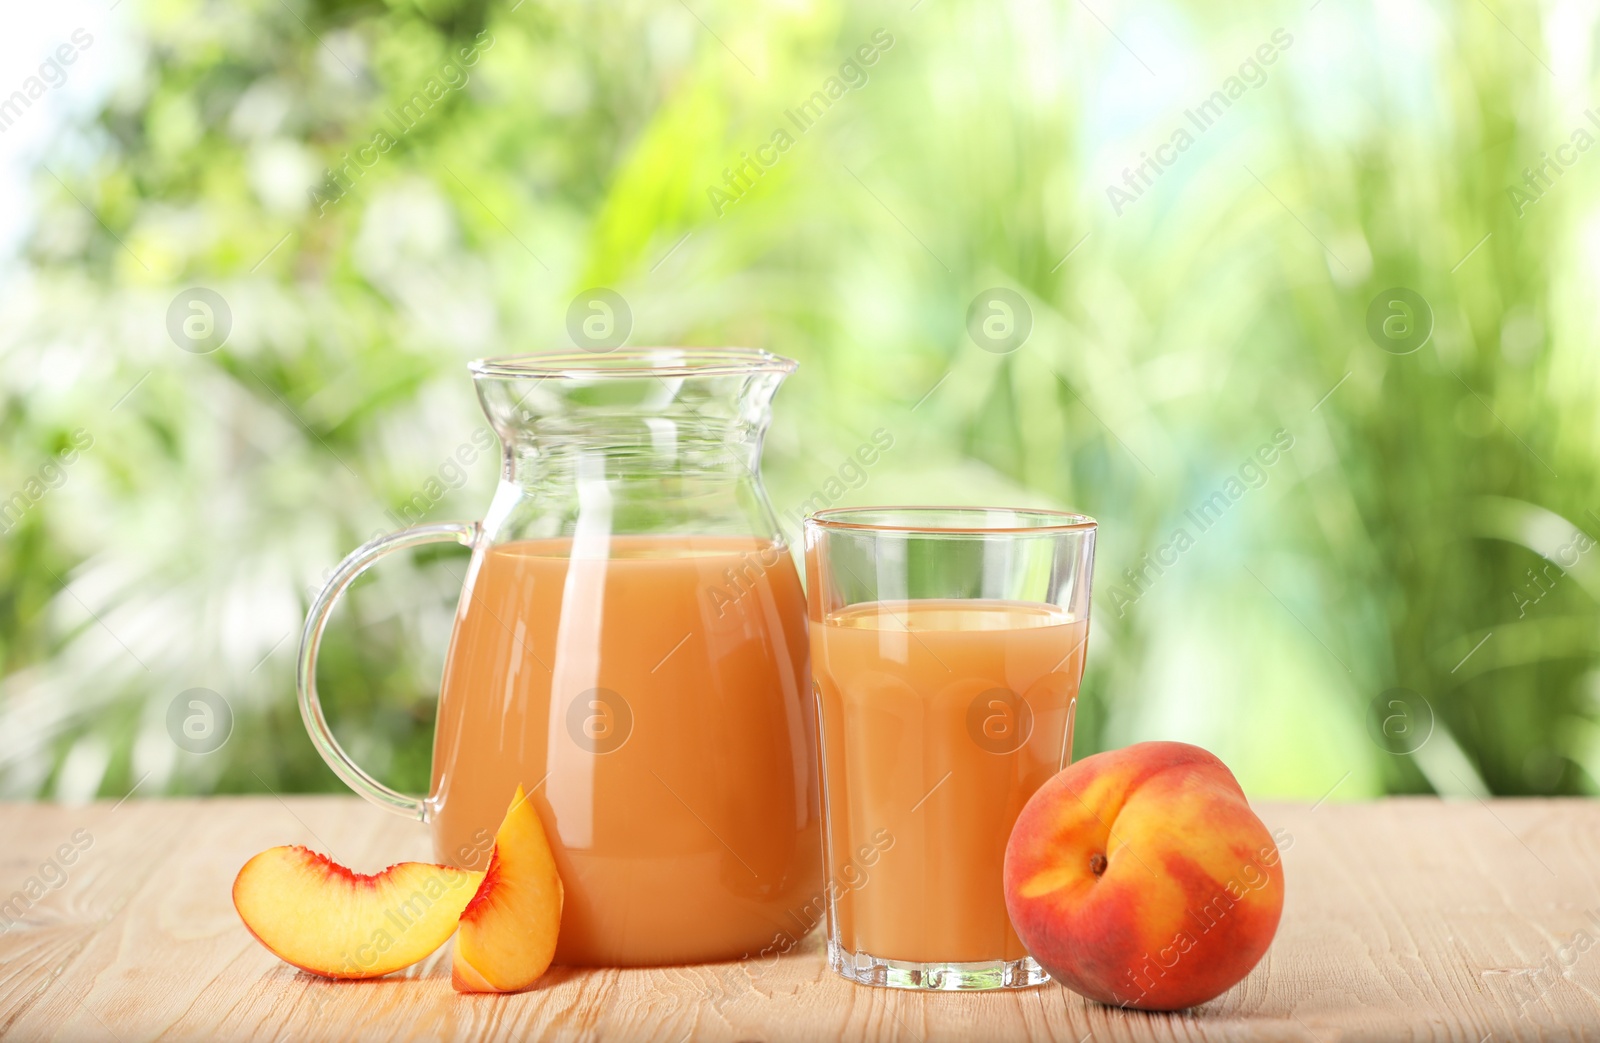 Photo of Tasty peach juice and fresh fruits on wooden table outdoors